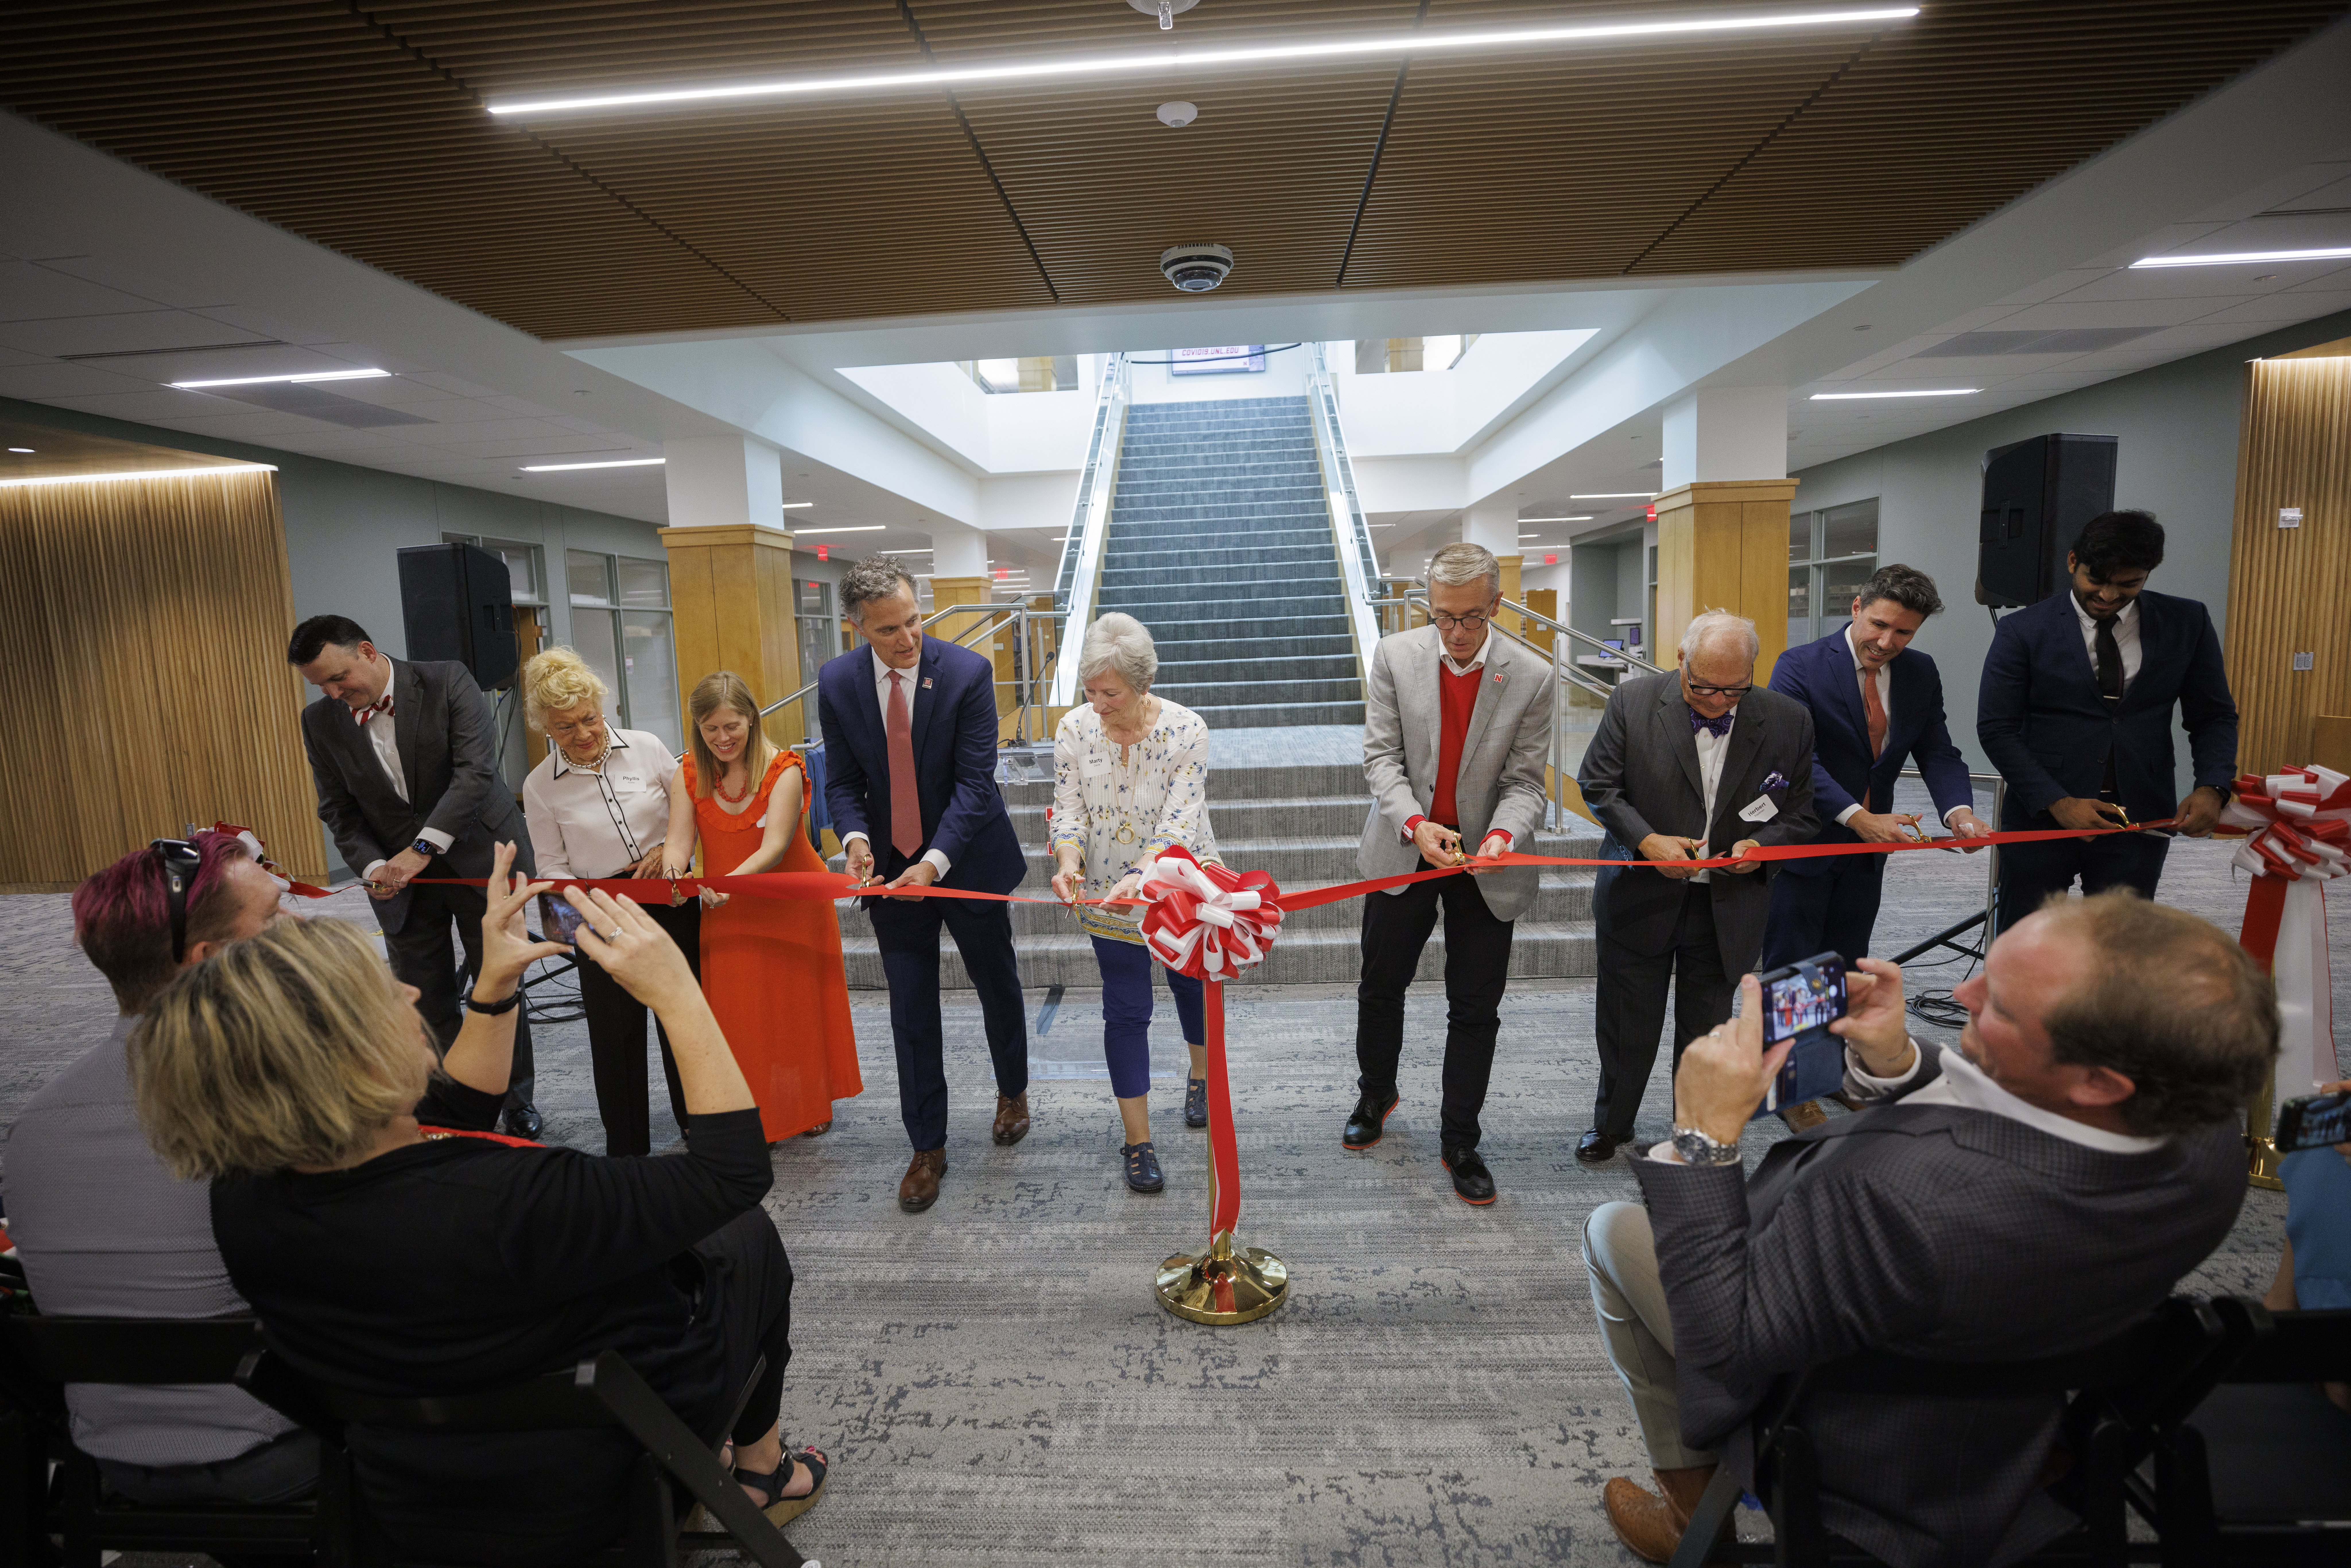 Ronnie Green, Dean Richard Moberly, and others cutting ribbon to the re-opening of the Schmid Library